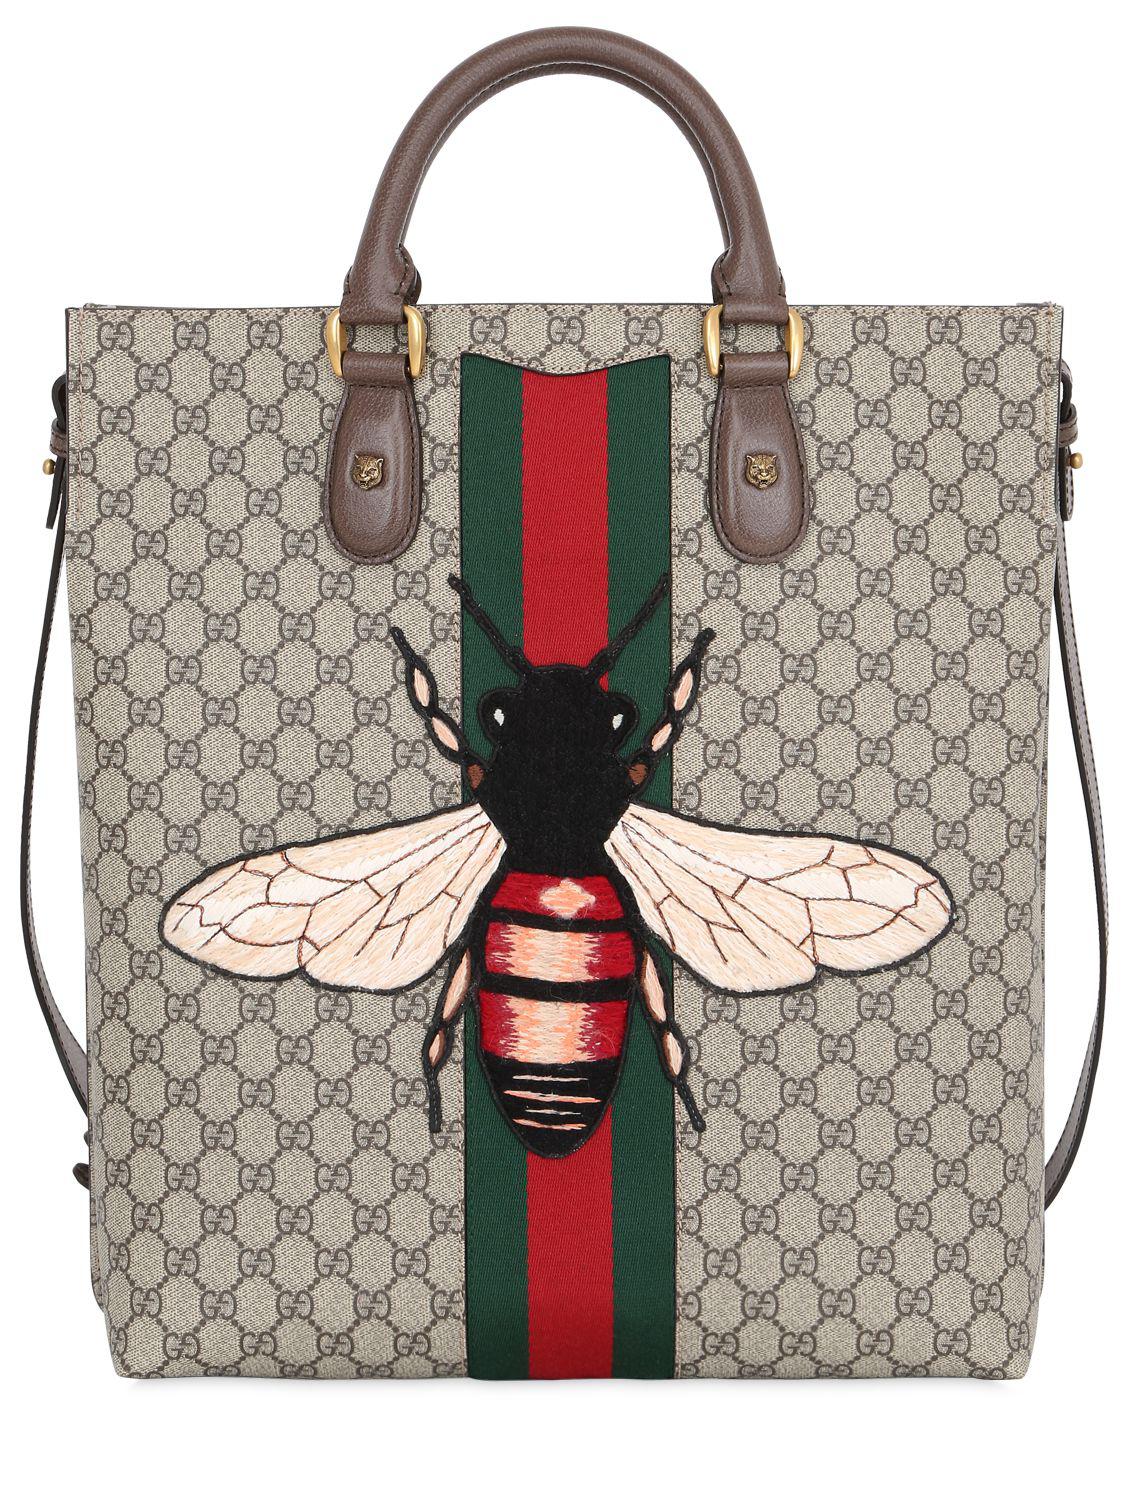 Gucci Leather Bee Patch Gg Supreme Tote Bag in Beige (Natural) - Lyst